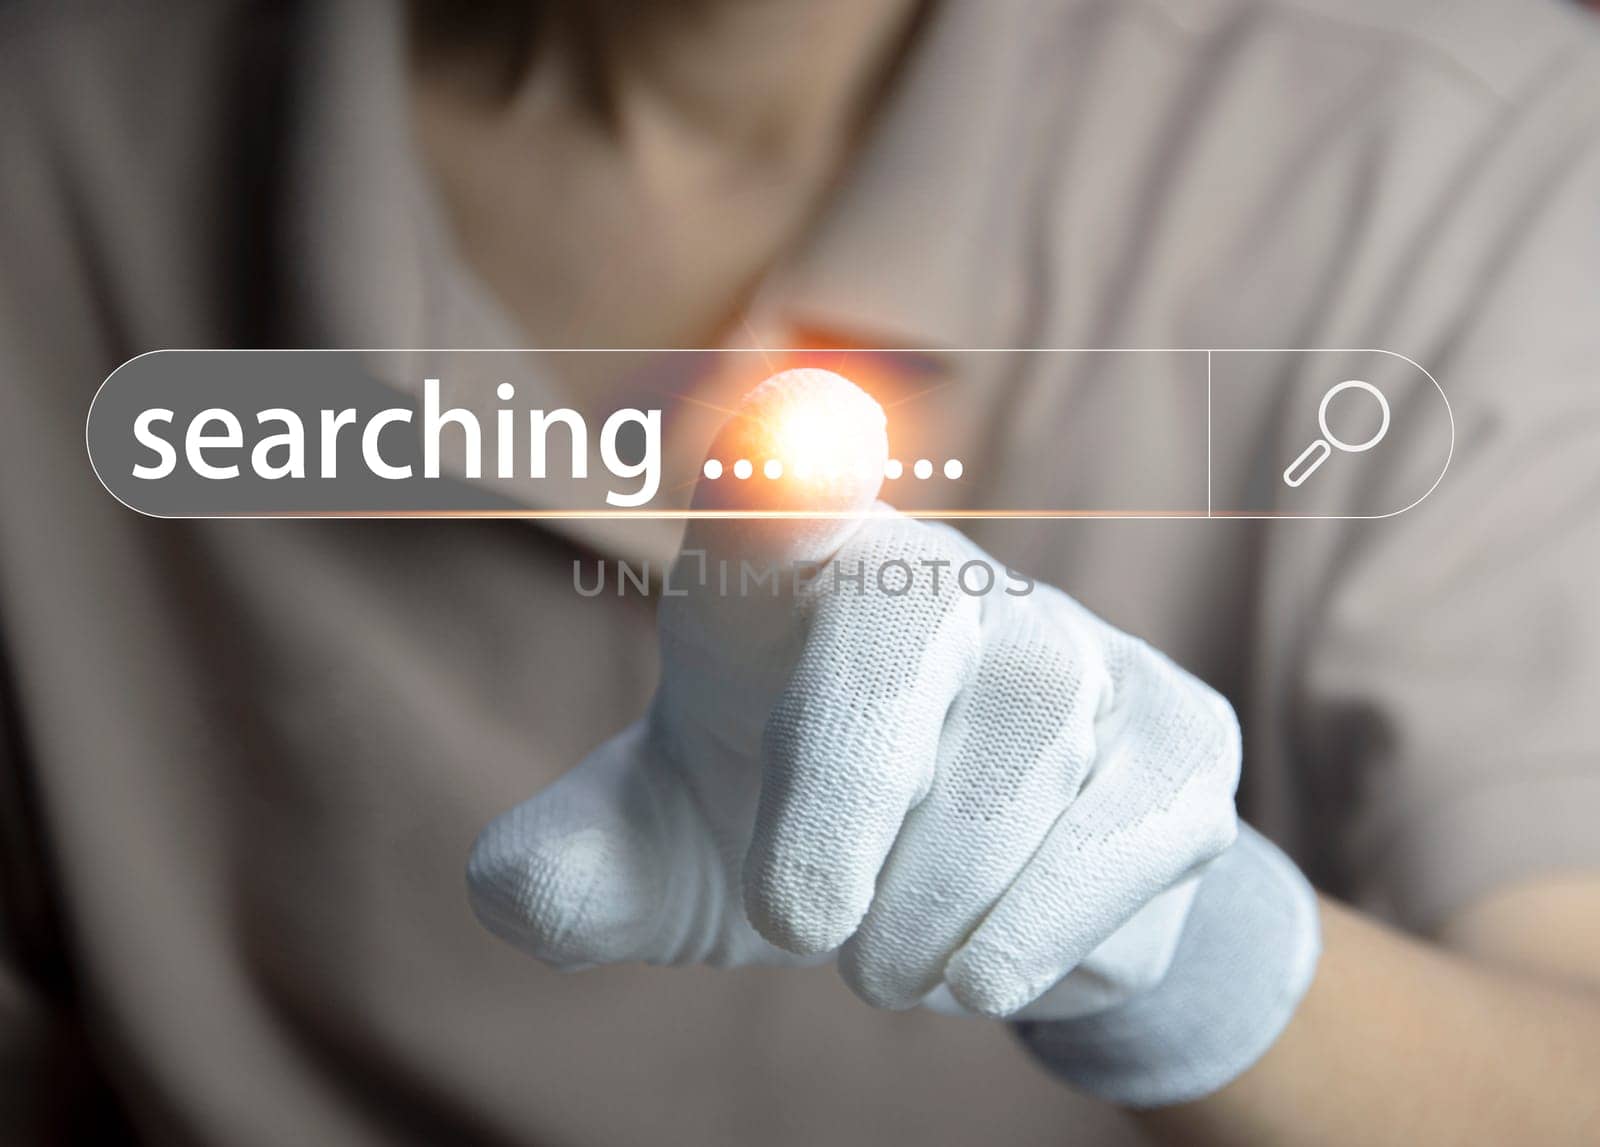 Searching information concept. Hand of man touching in icon search